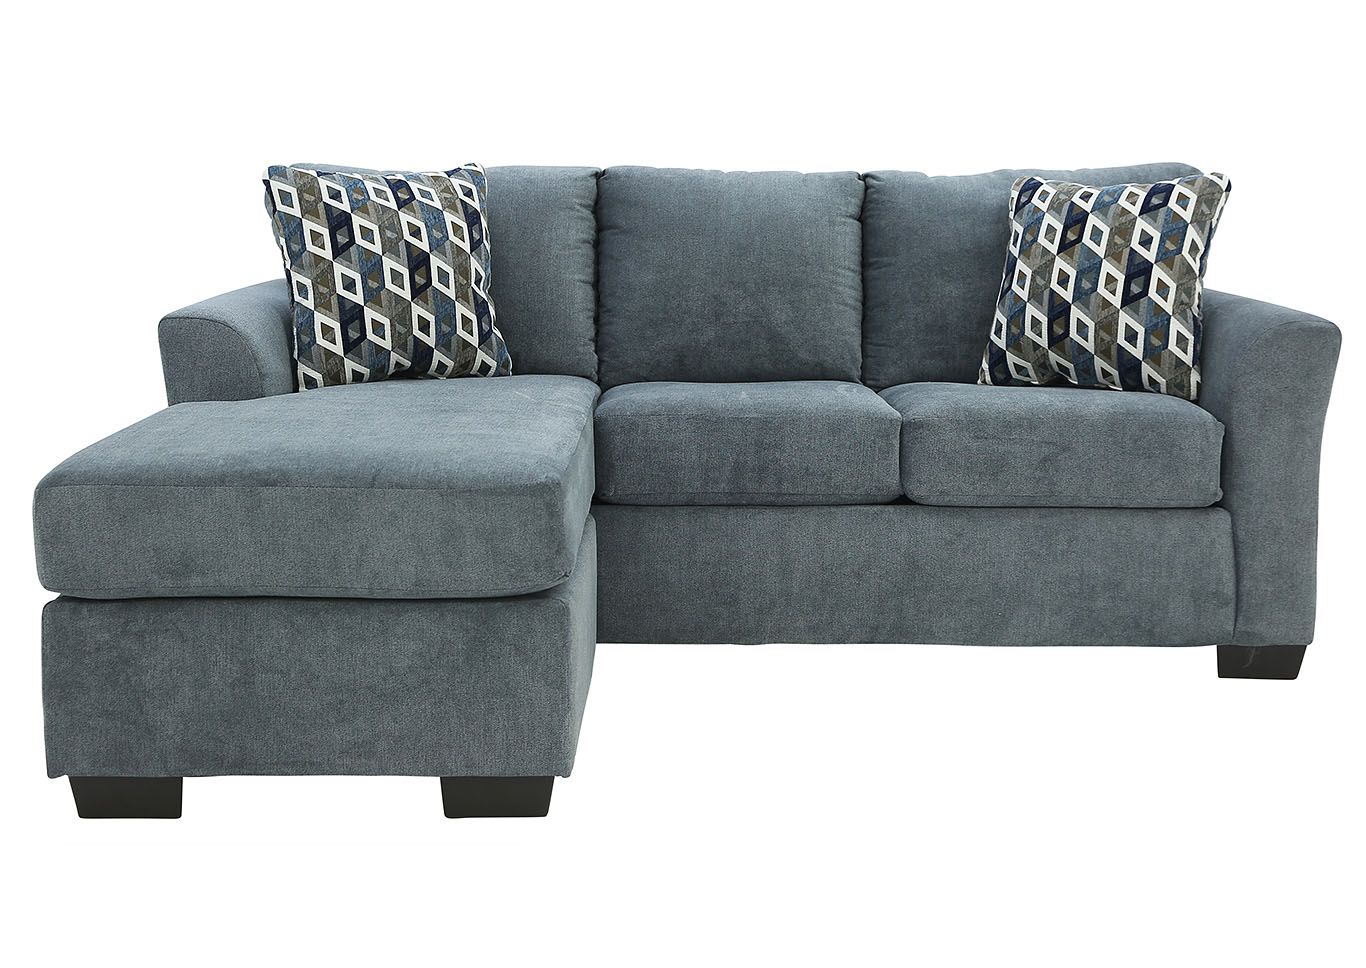 Anna Blue Sleeper Sofa With Chaise Ivan Smith Furniture Throughout Convertible Sofa With Matching Chaise (View 16 of 20)